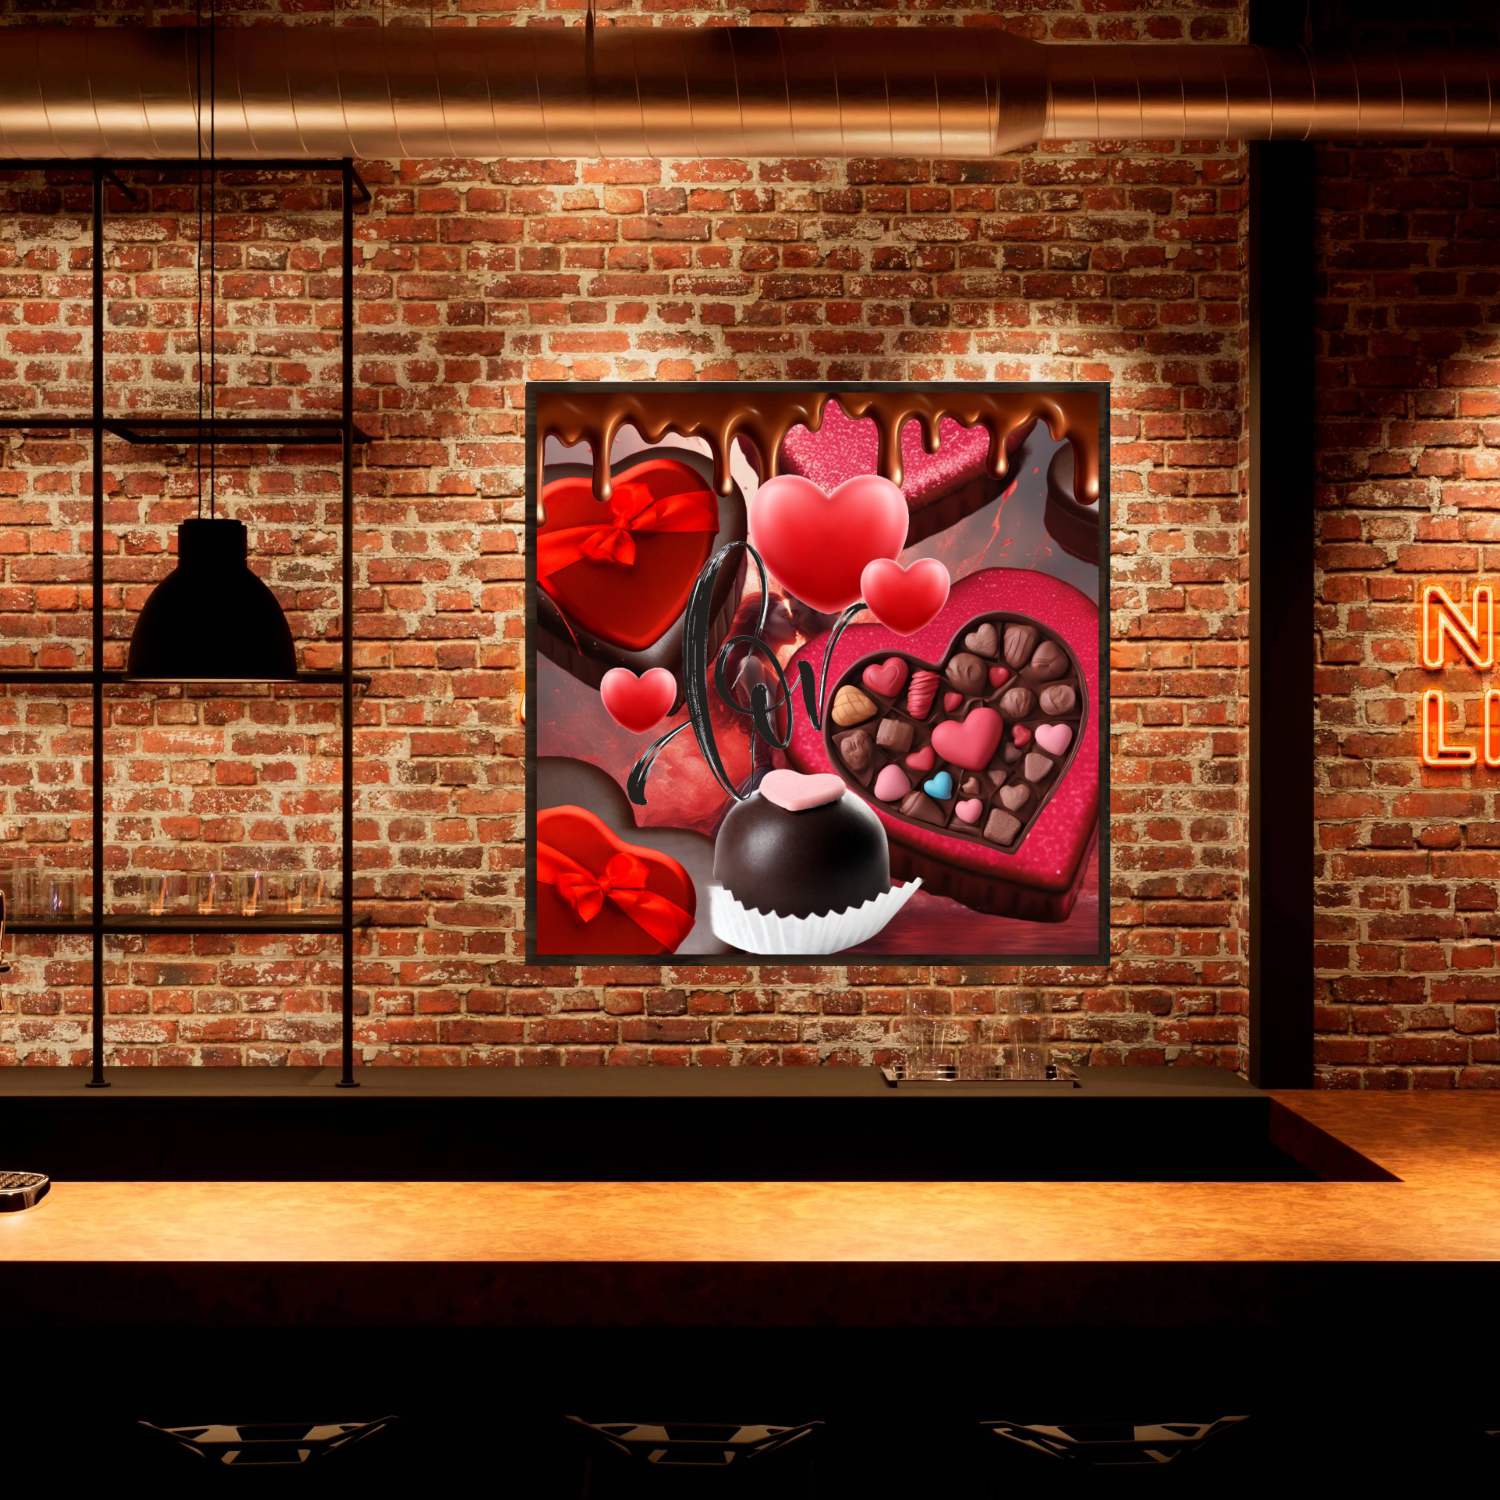 Wall Art CHOCOLATE Canvas Print Painting Original Giclee 32X32 + Frame Love Nice Beauty Fun Design Fit Hot House Home Office Gift Ready Hang Living